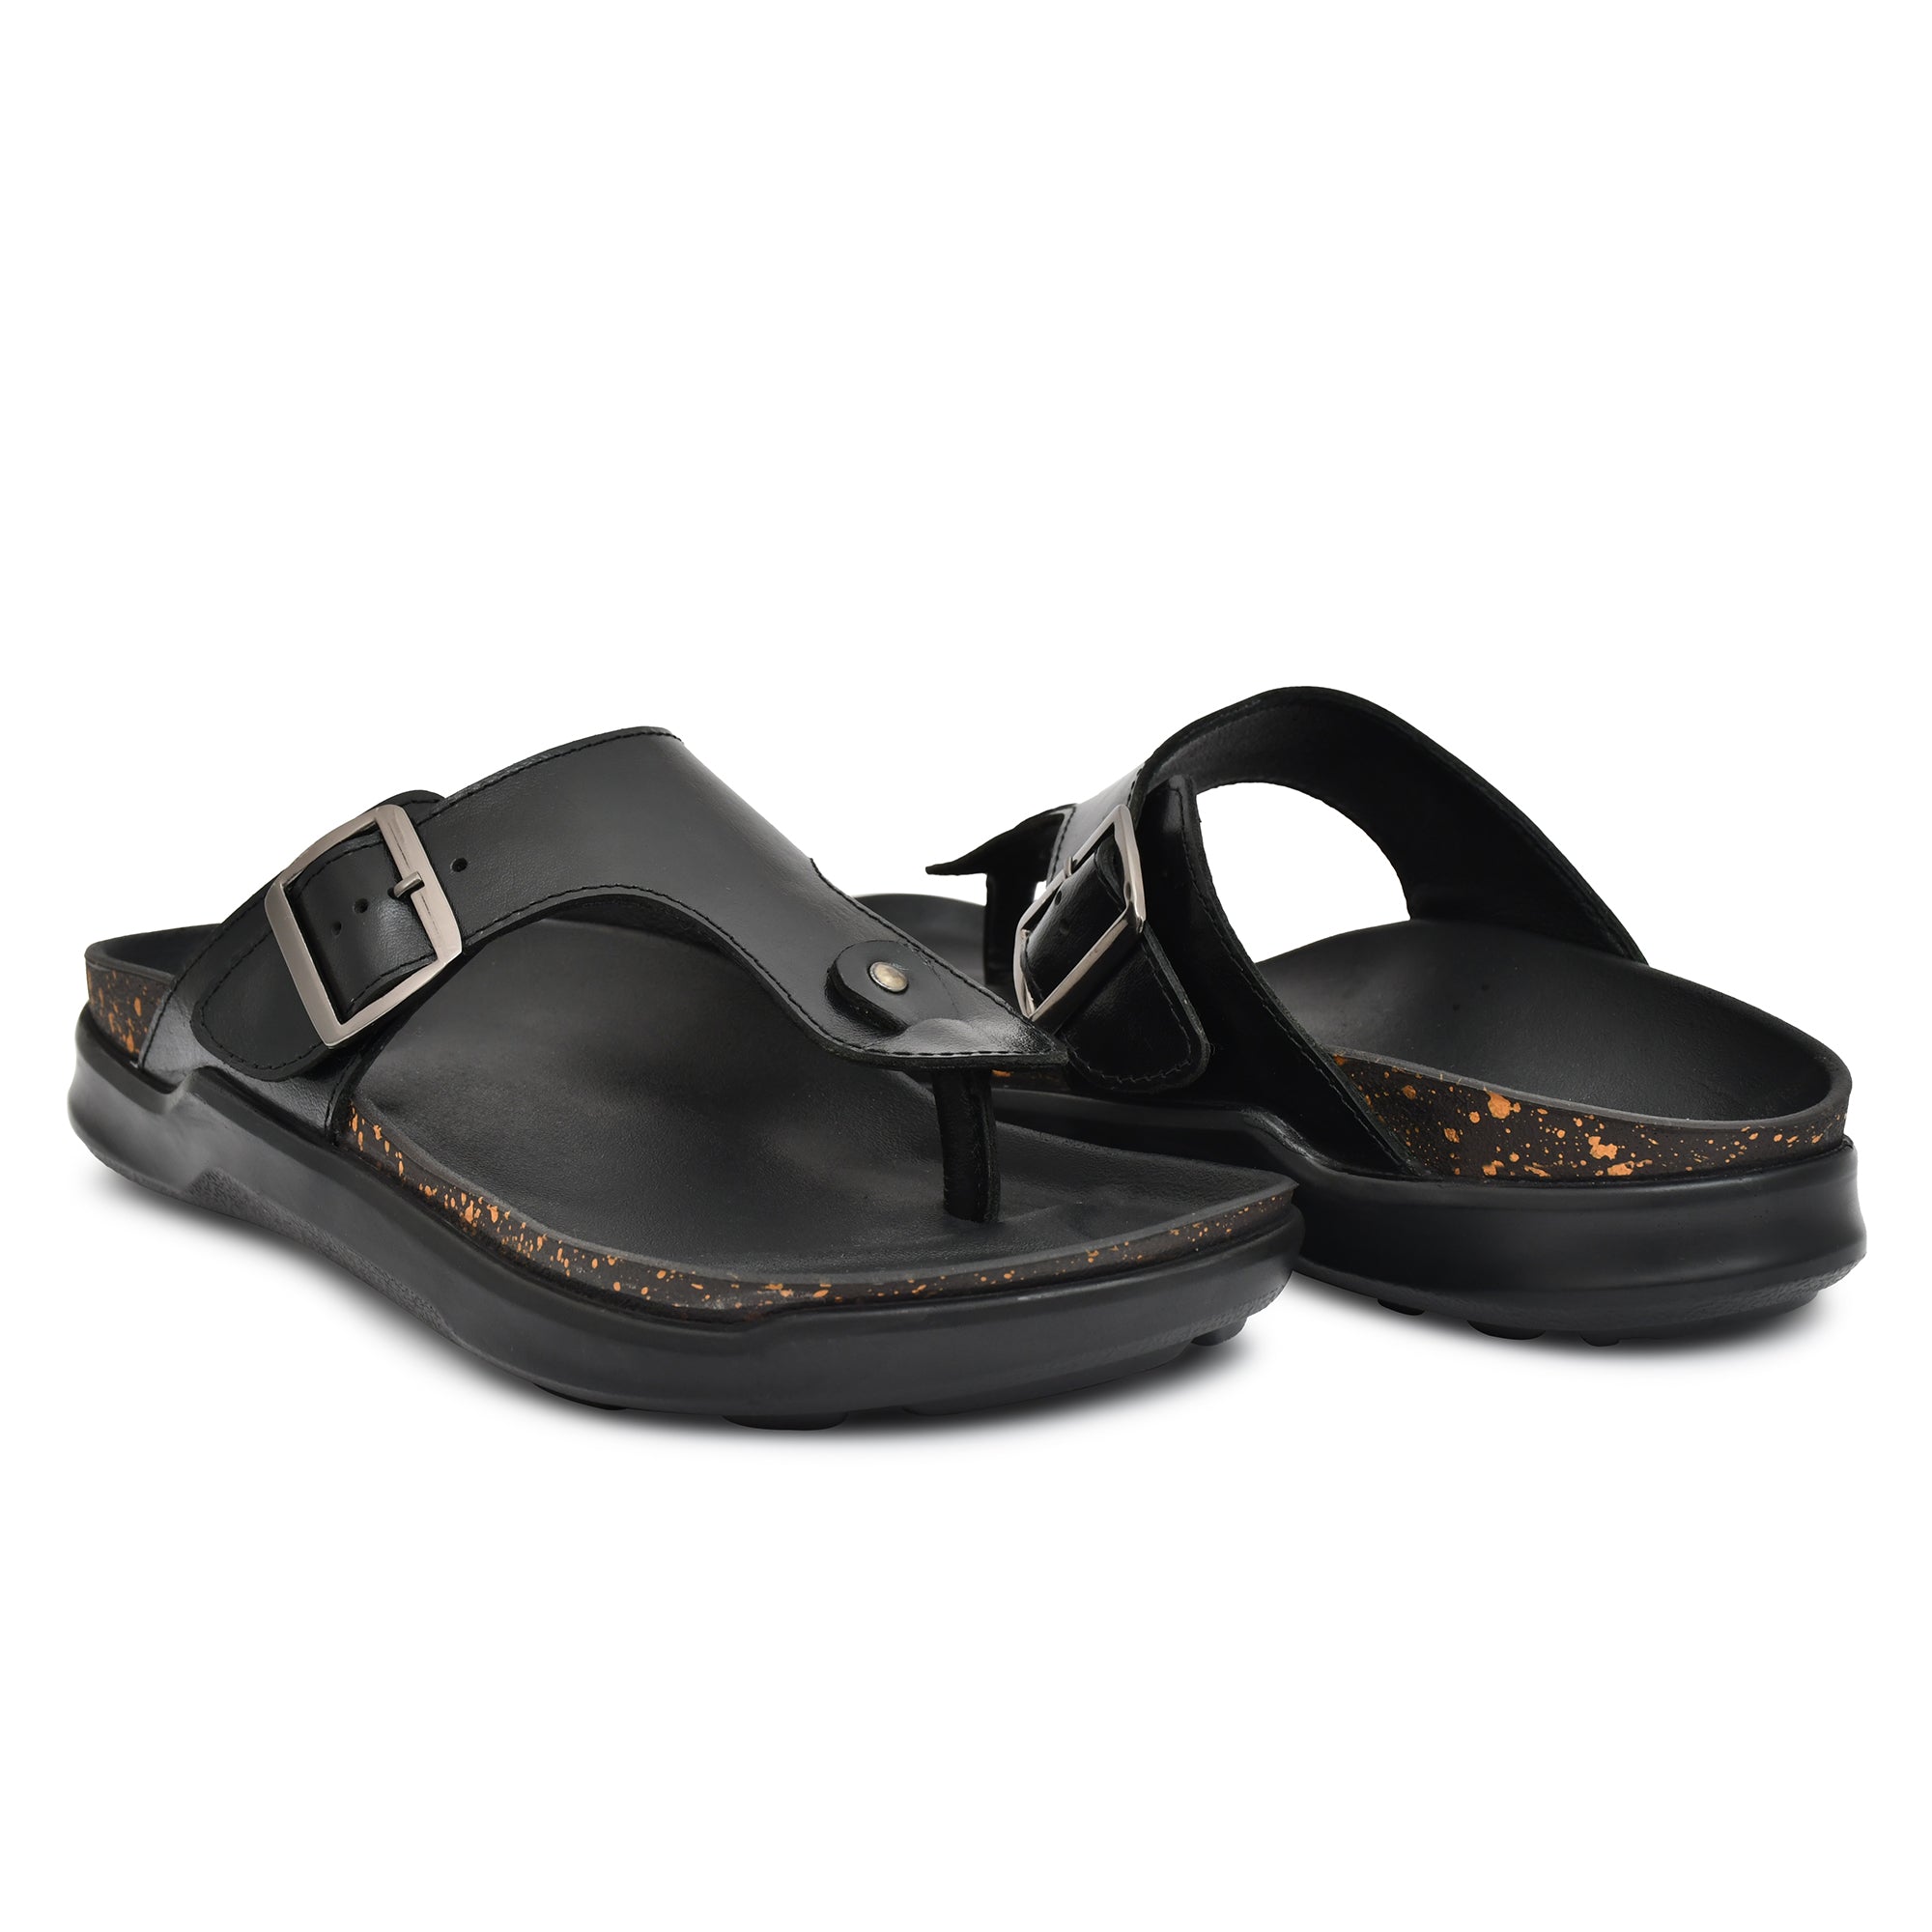 Country Maddox Black Leather Slippers 